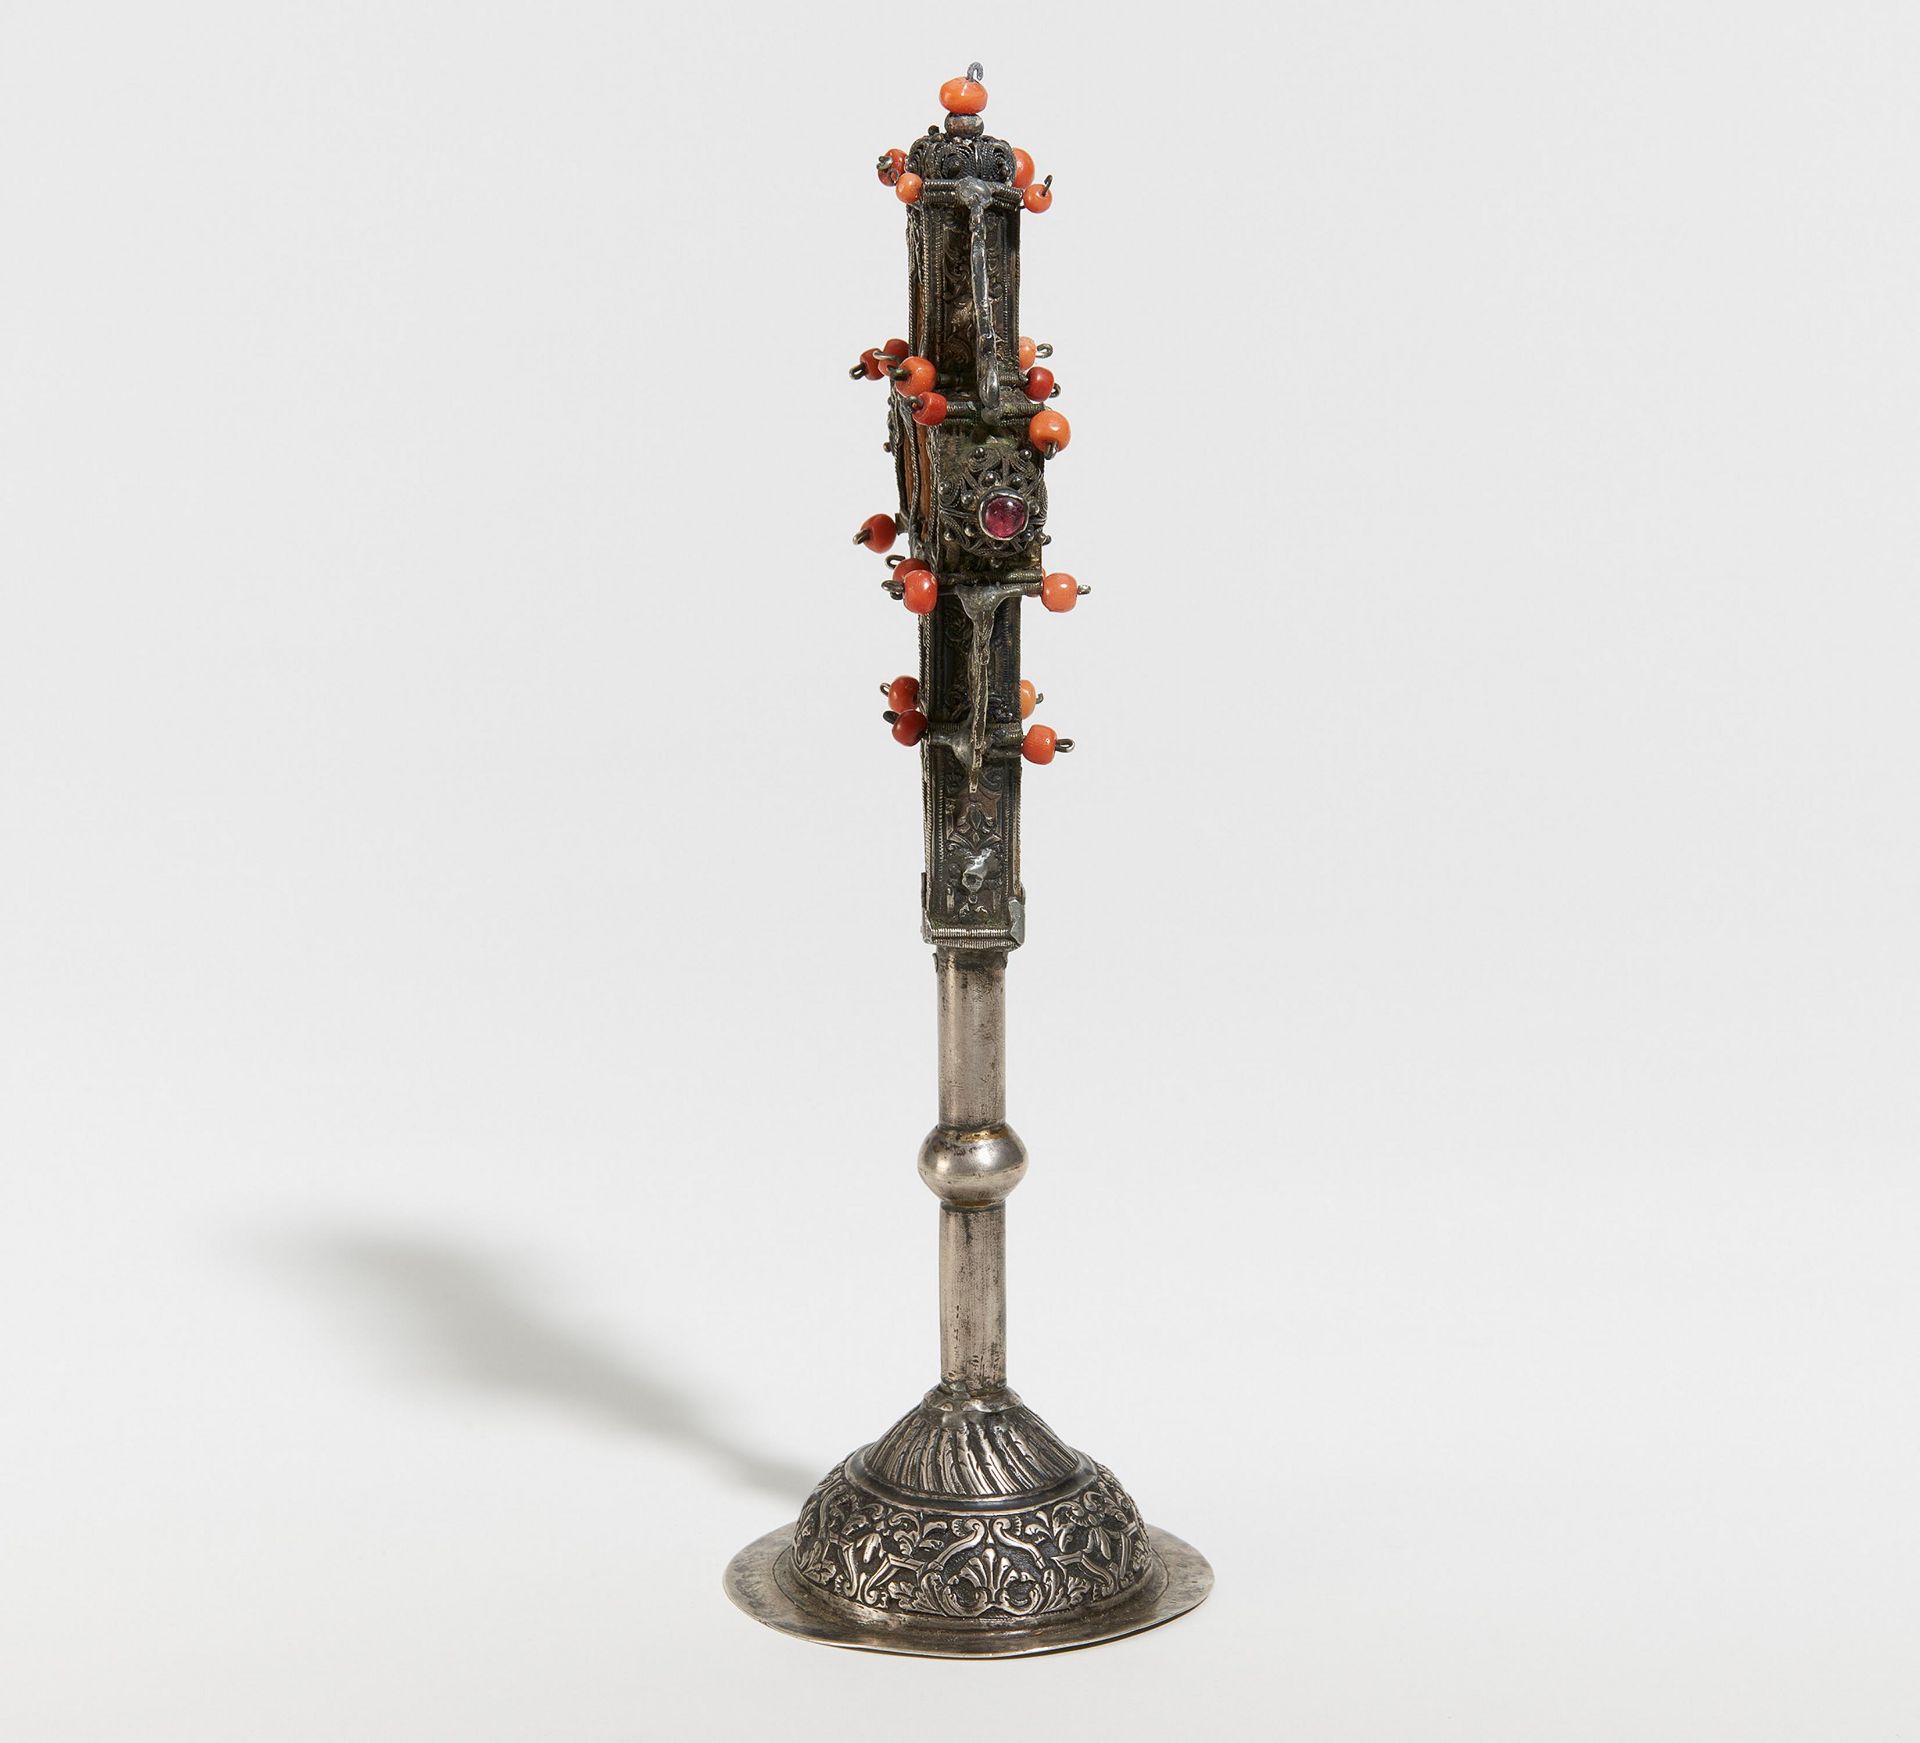 SMALL TABLE CROSS MADE OF SILVER, CORAL AND CEDAR WOOD. Mount Athos. Date: 18th century. - Bild 5 aus 5